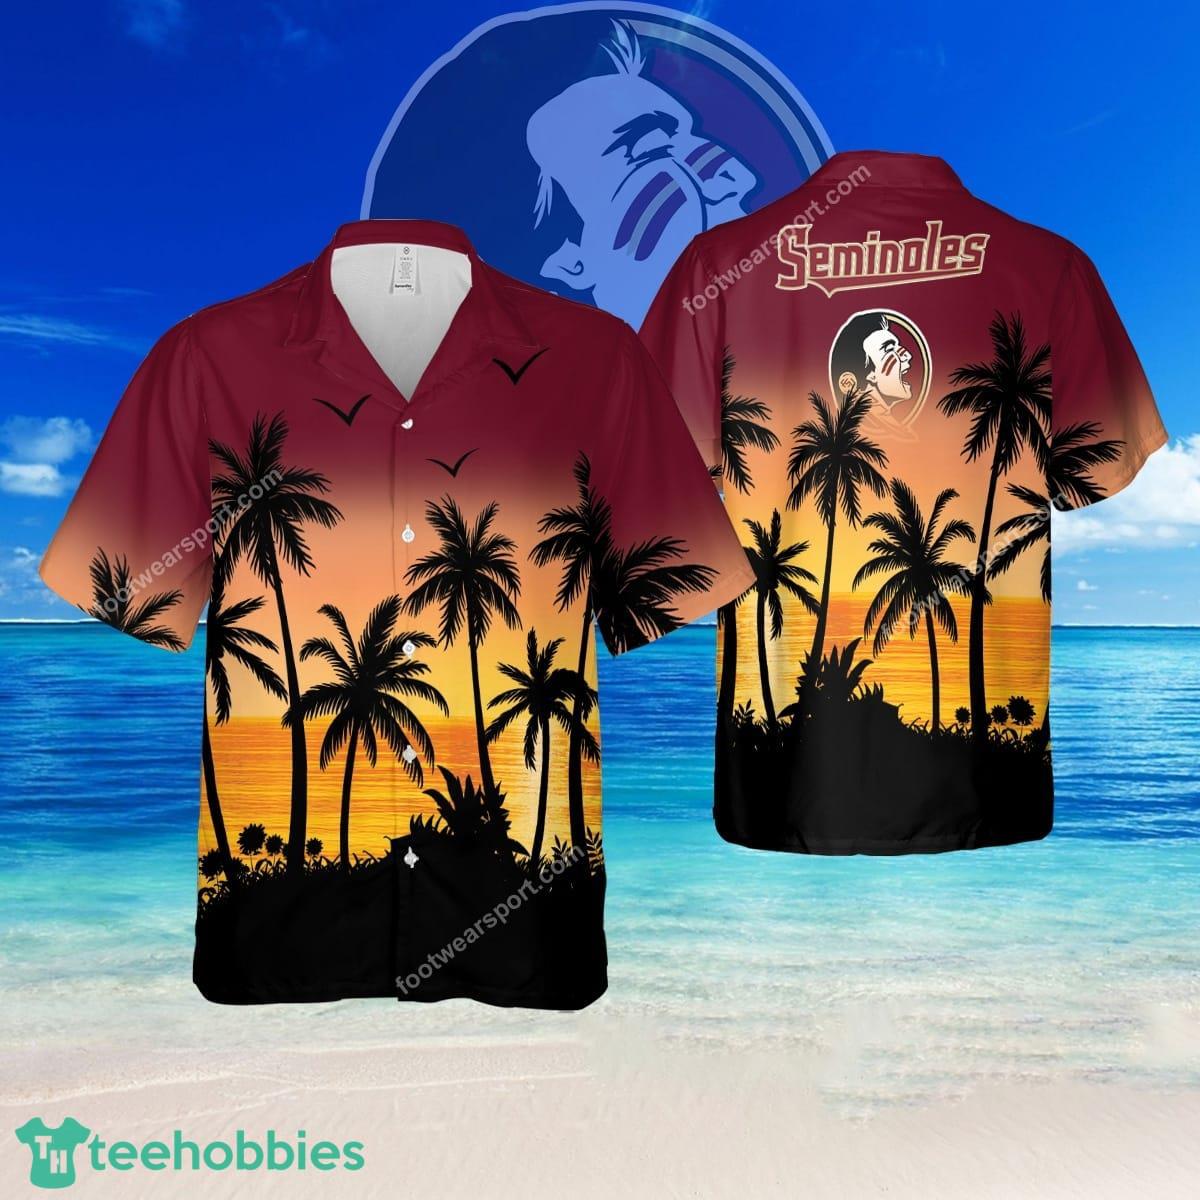 NCAA Florida State Seminoles Party Brand New 3D Hawaiian Shirt For Summer - NCAA Florida State Seminoles Party Brand New 3D Hawaiian Shirt For Summer